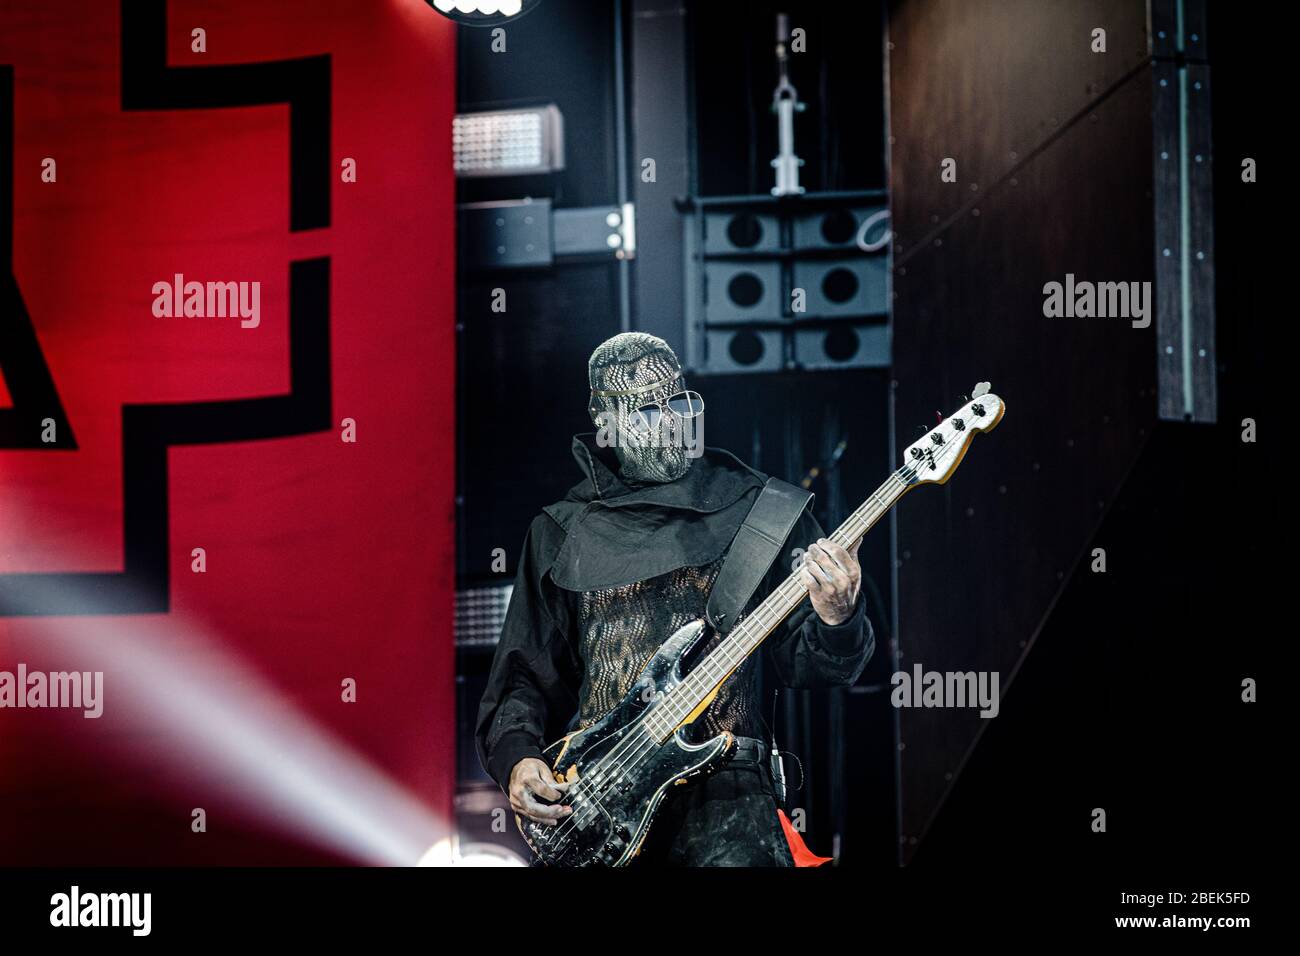 Copenhagen, Denmark. 19th, June 2019. Rammstein, the German industrial metal band, performs a live concert at Telia Parekn in Copenhagen. Here bass player Oliver Riedel is seen live on stage. (Photo credit: Gonzales Photo - Thomas Rungstrom). Stock Photo